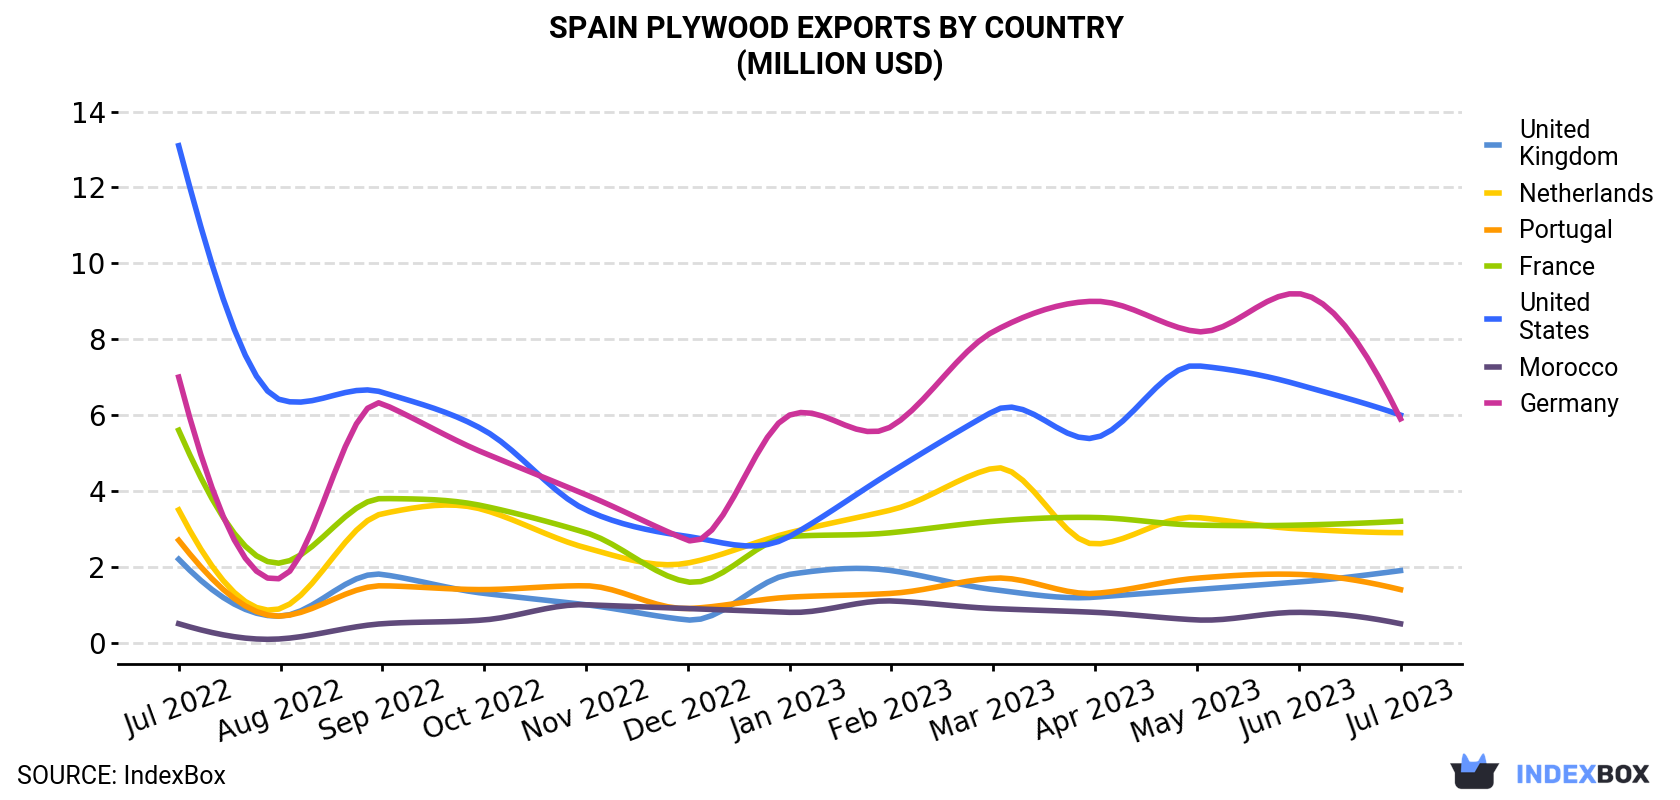 Spain Plywood Exports By Country (Million USD)